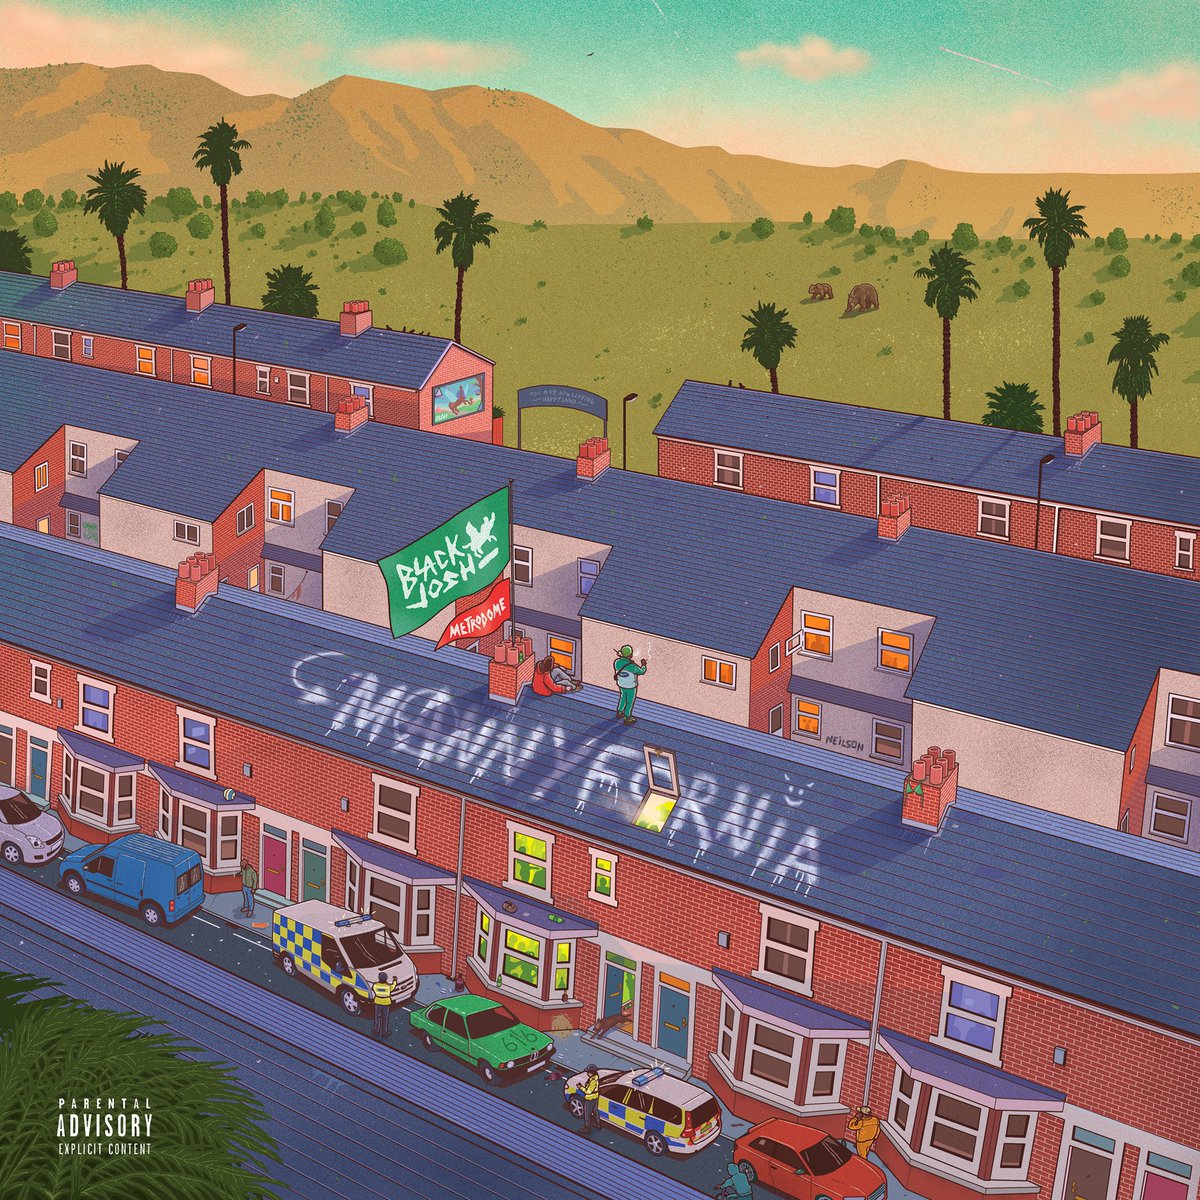 69. Black Josh - Mannyfornia (uk rap that sounds like grime and drill never existed)